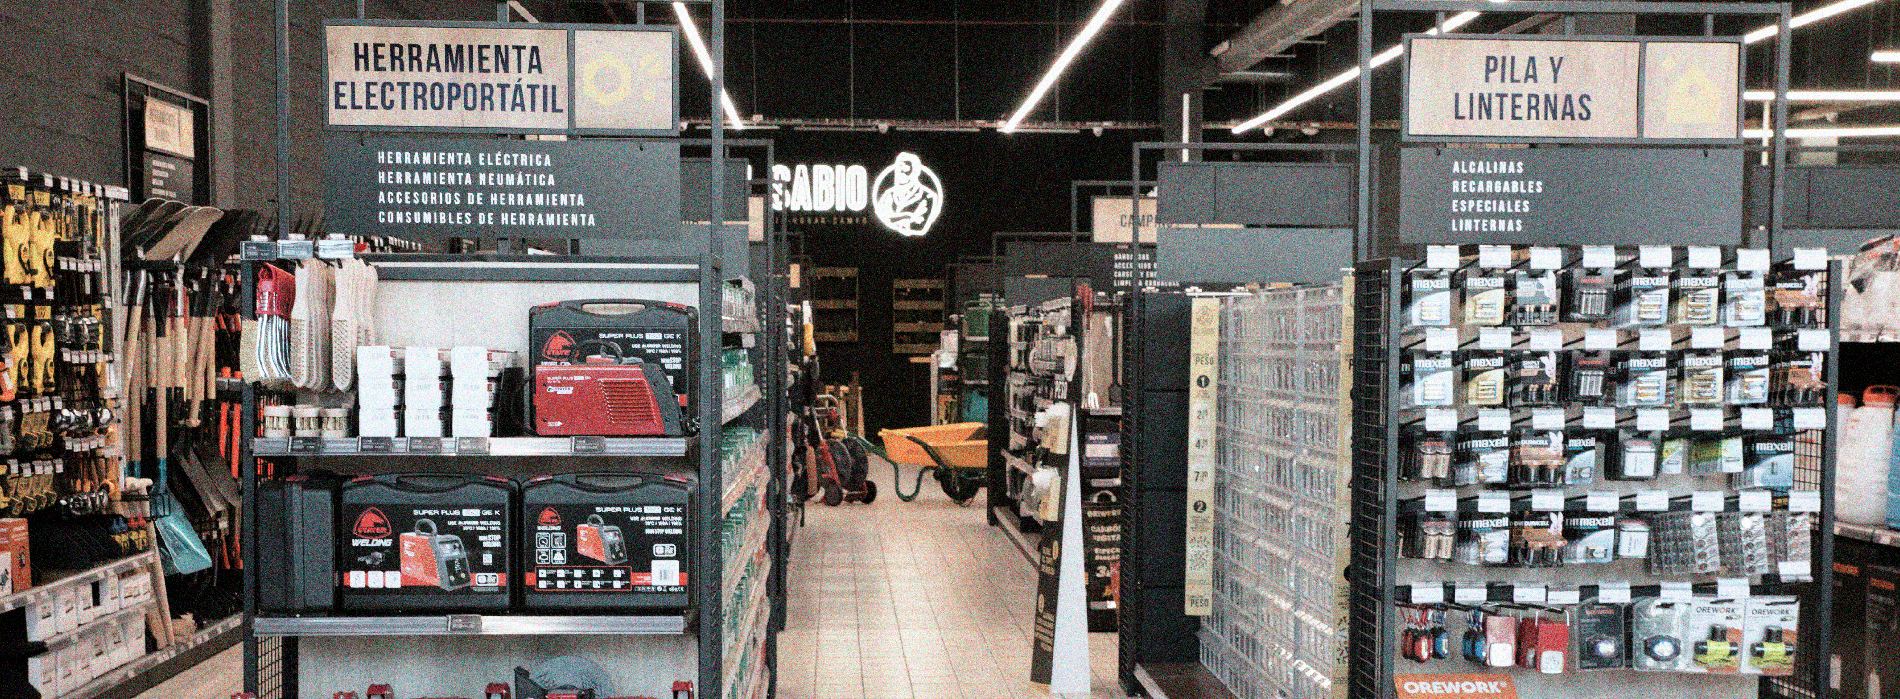 Hardware shop chain El Sabio opens the first shop in Spain adapted to people with autism